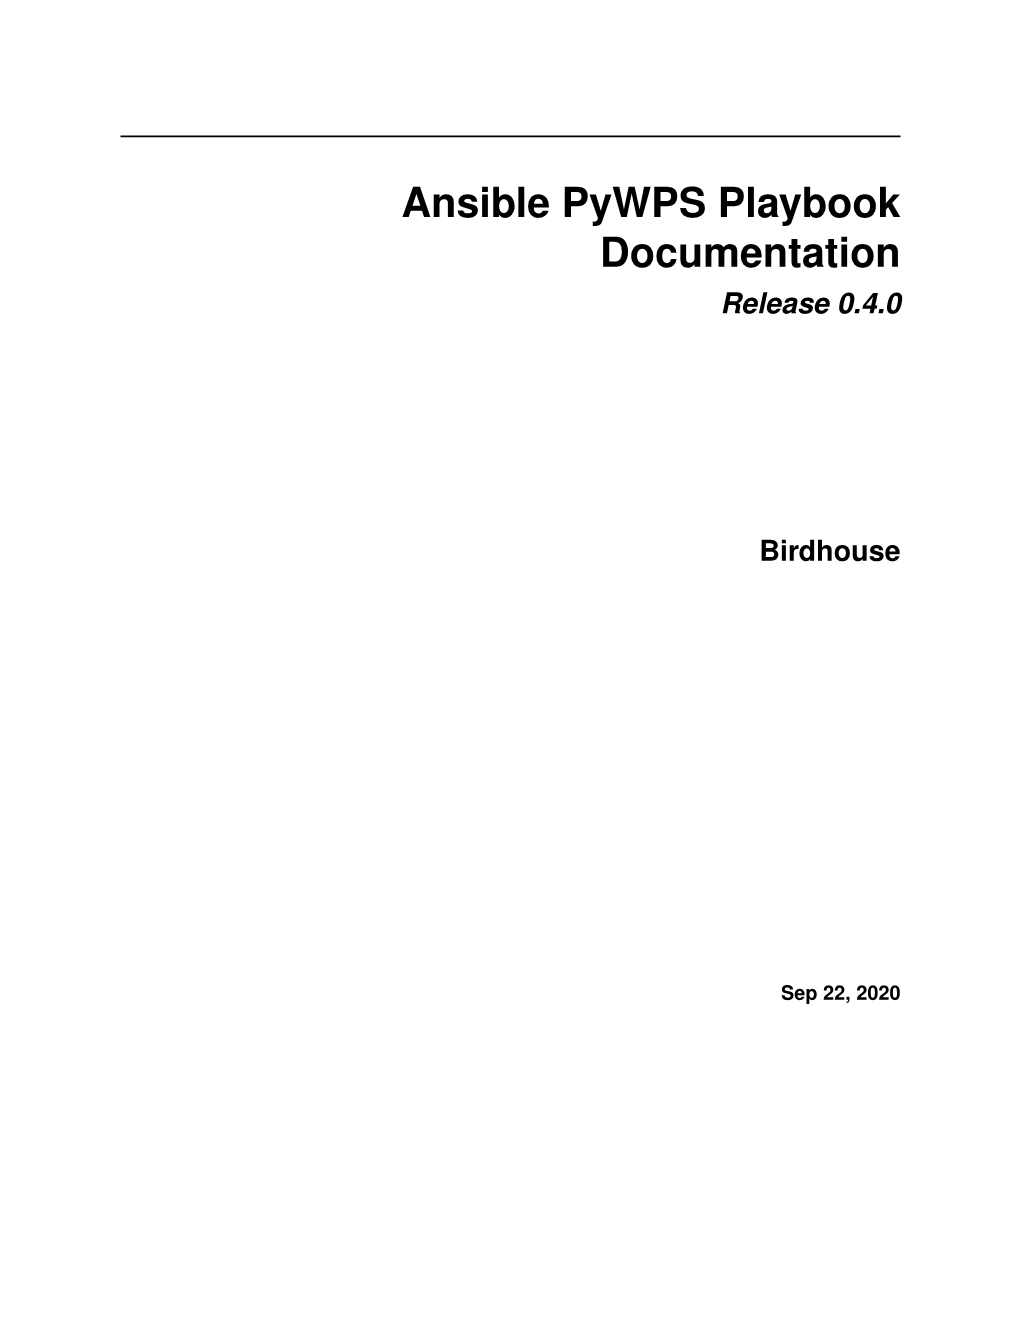 Ansible Pywps Playbook Documentation Release 0.4.0